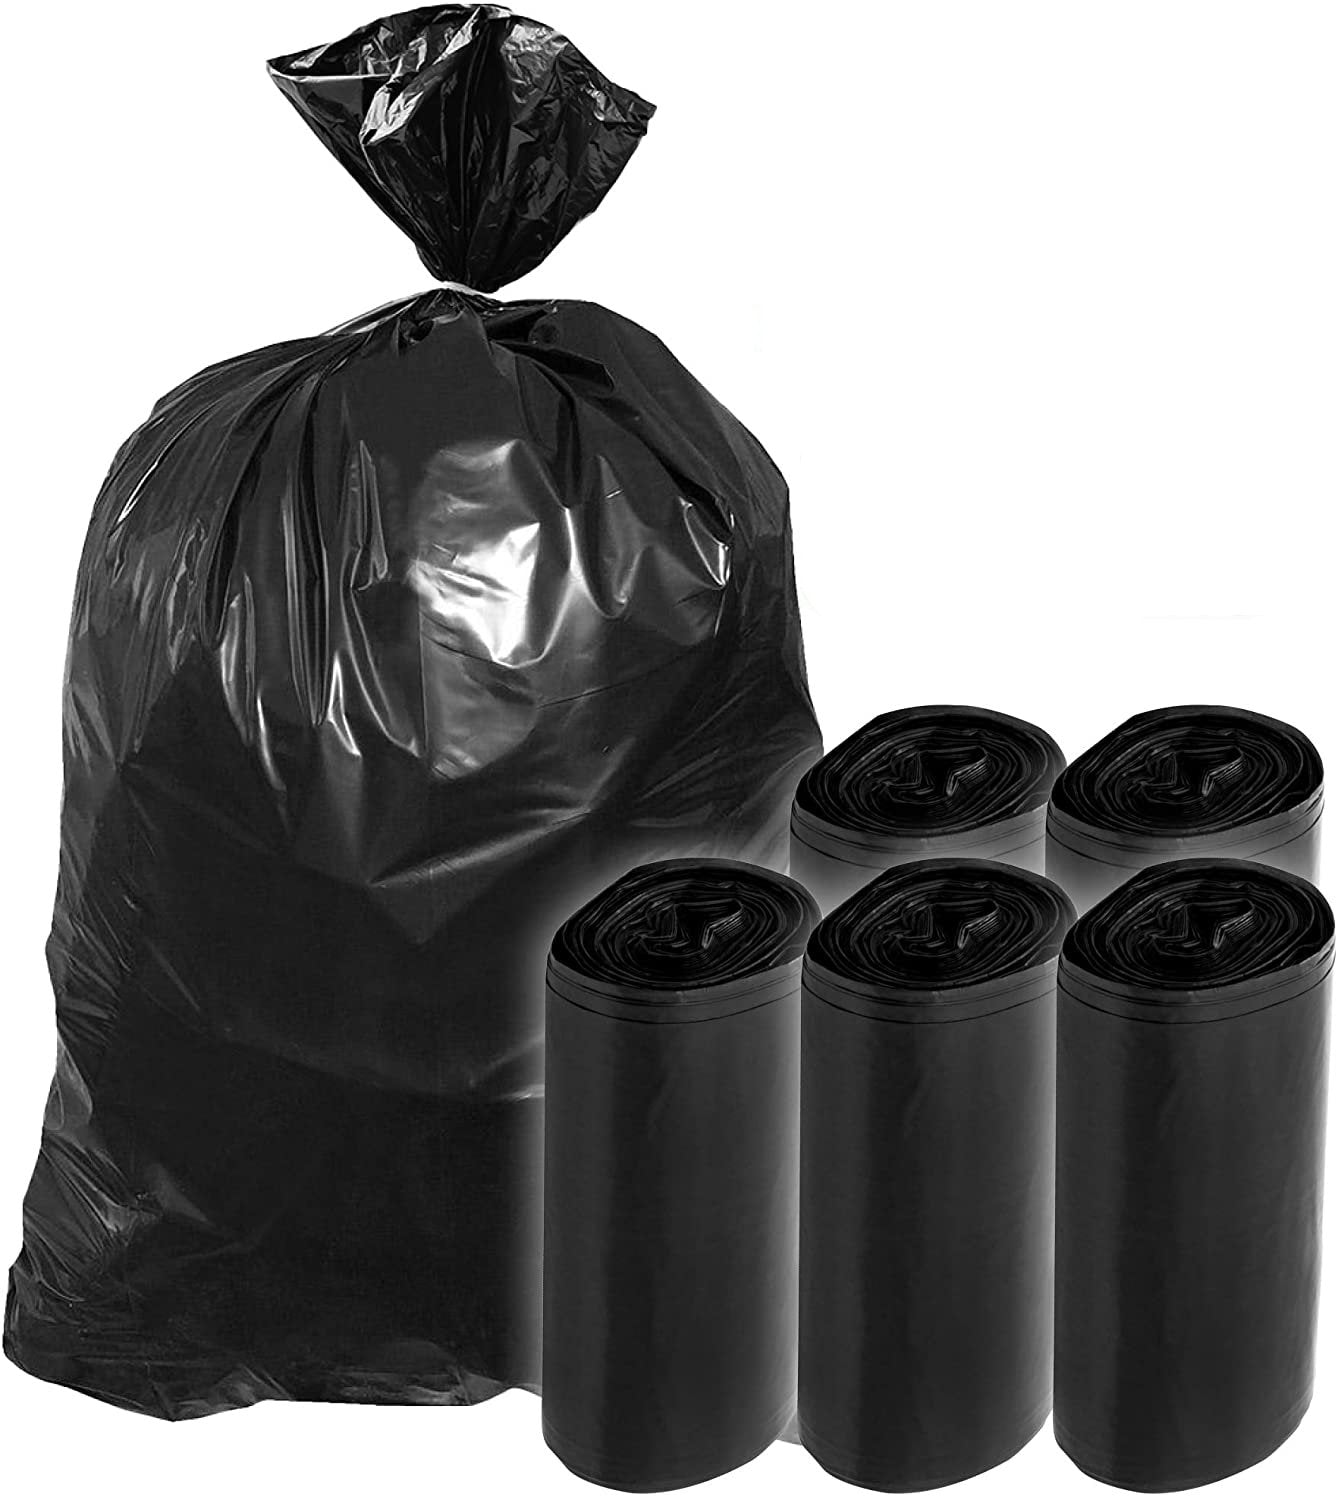 1504 Disposable Eco-friendly Garbage/Dustbin/Trash Bag (Pack of 30) (Size 19X21) - SkyShopy